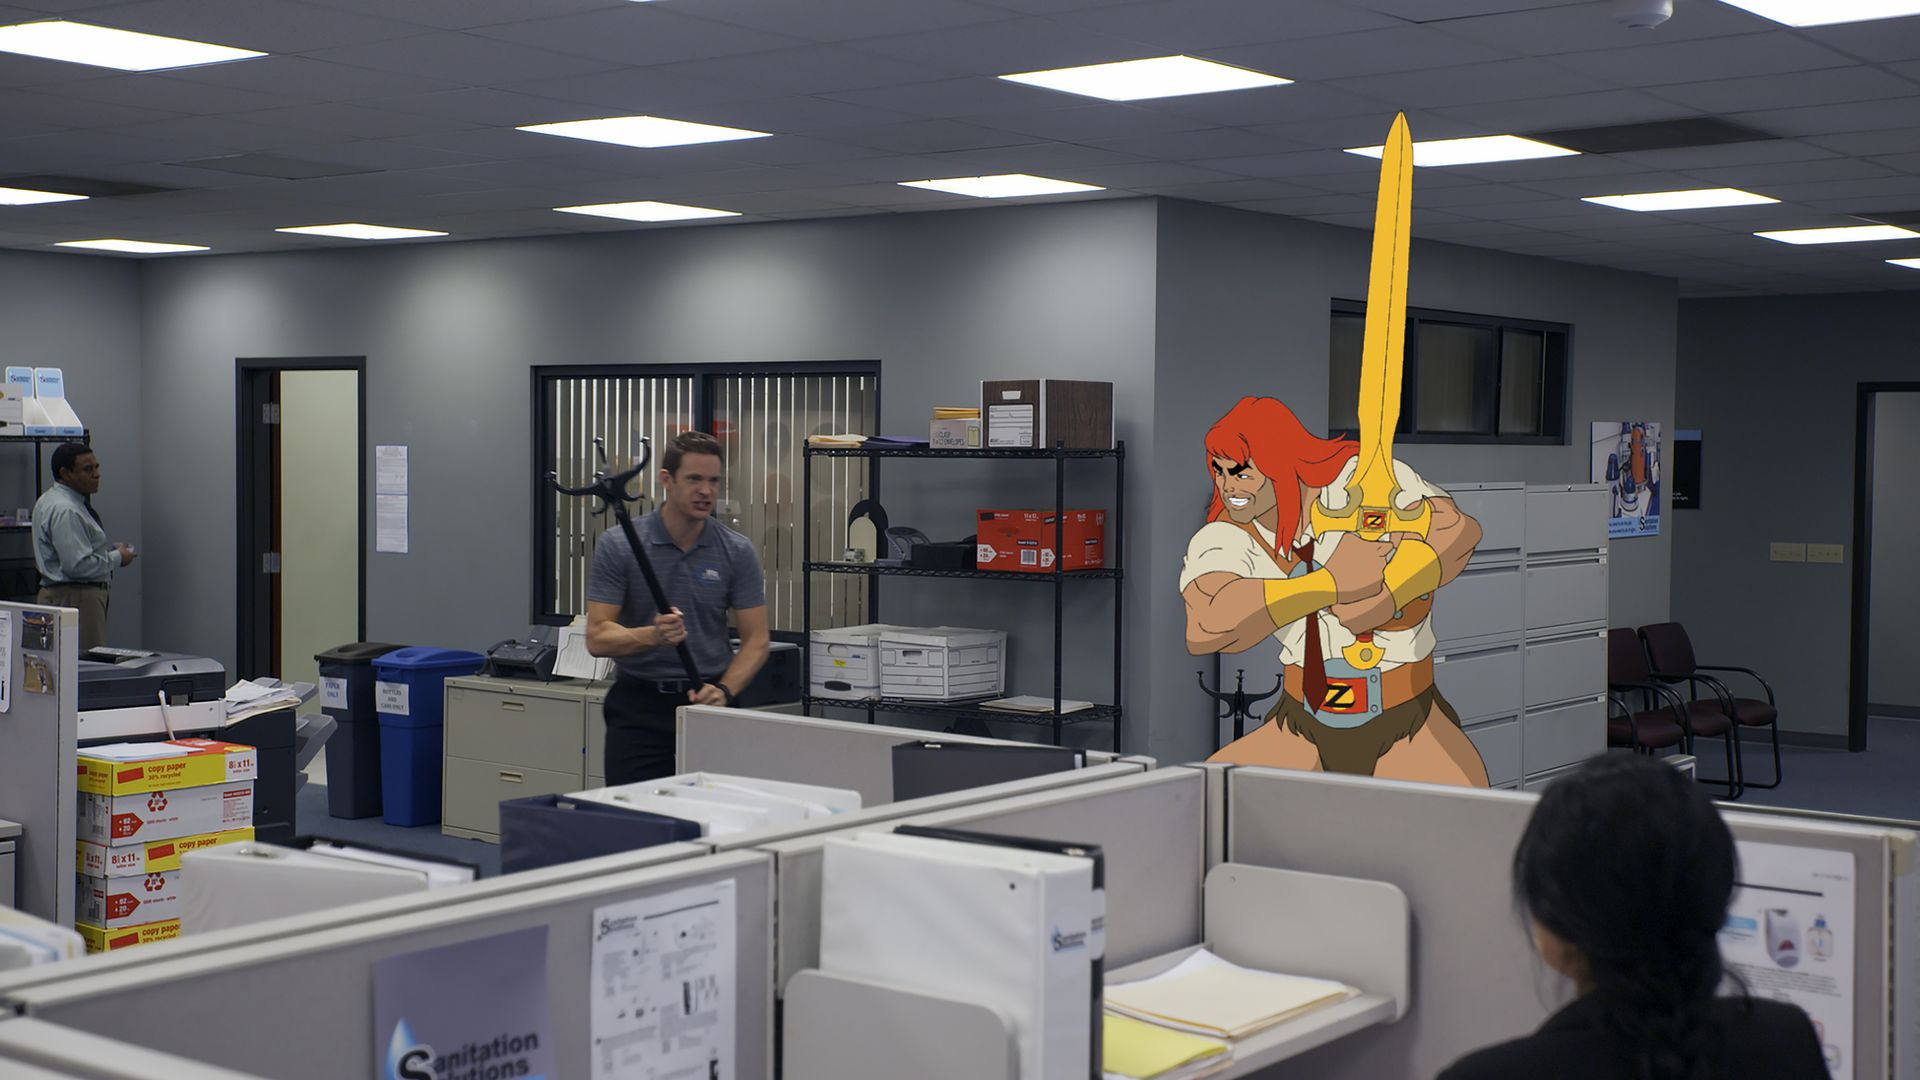 Son of Zorn background